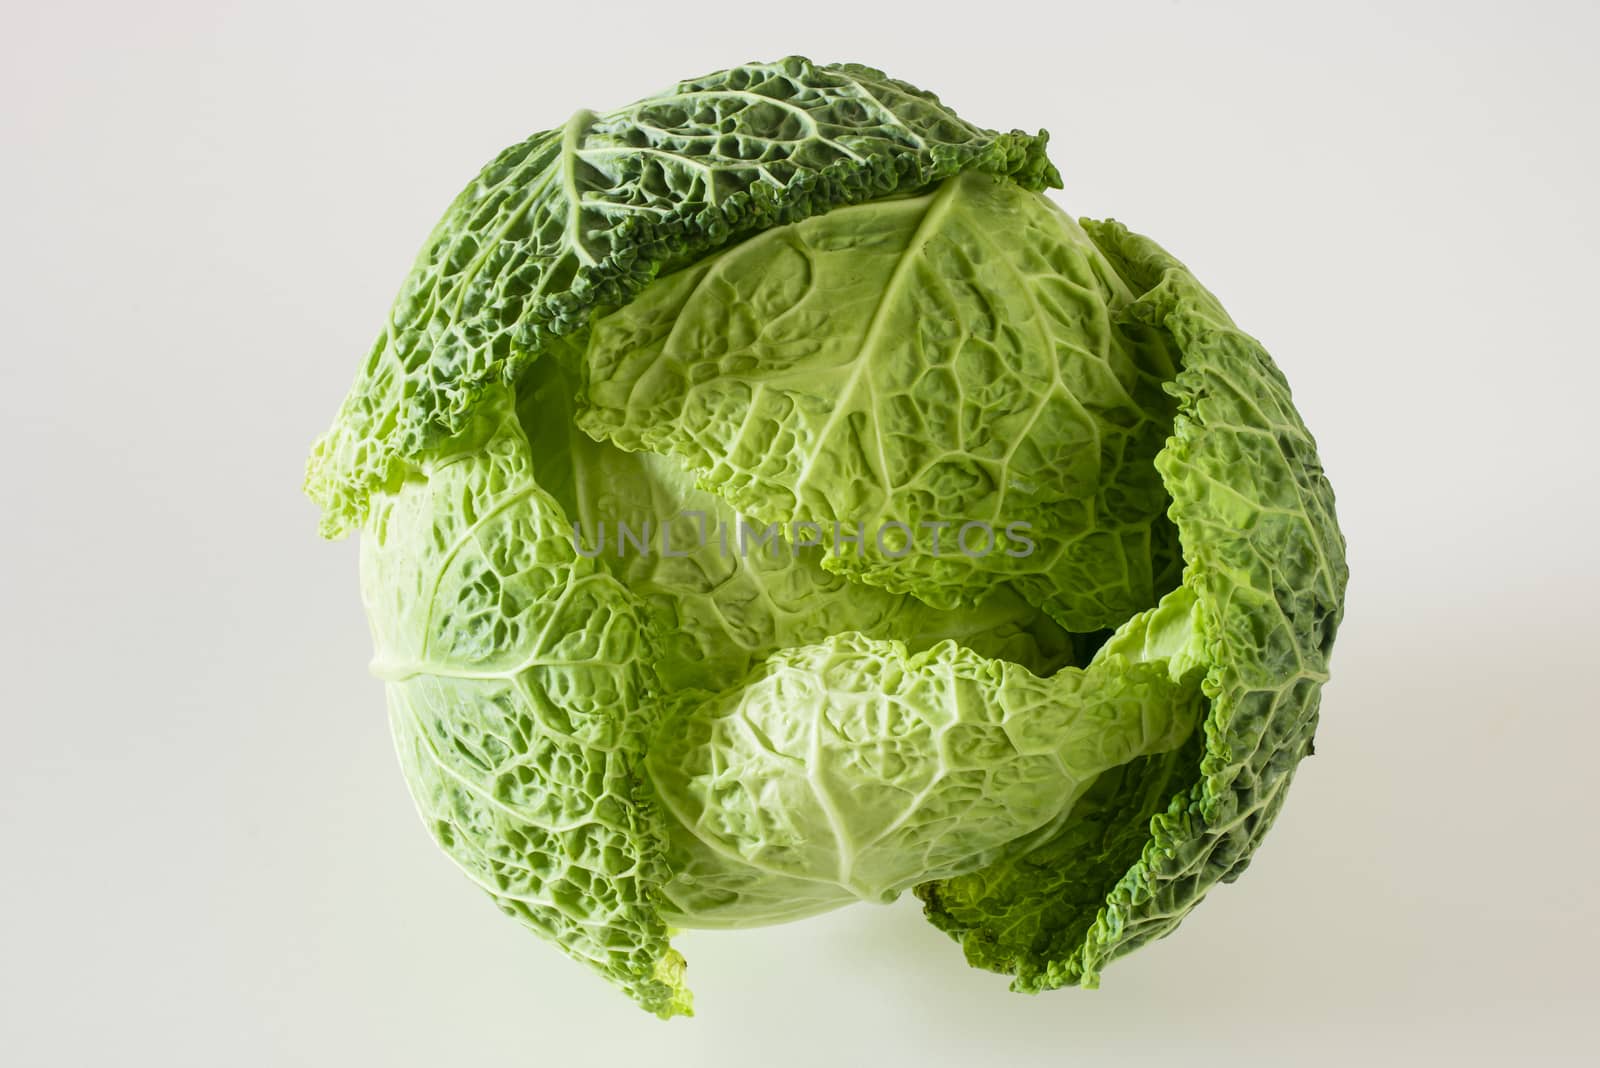 savoy cabbage on a white background  by AlessandroZocc